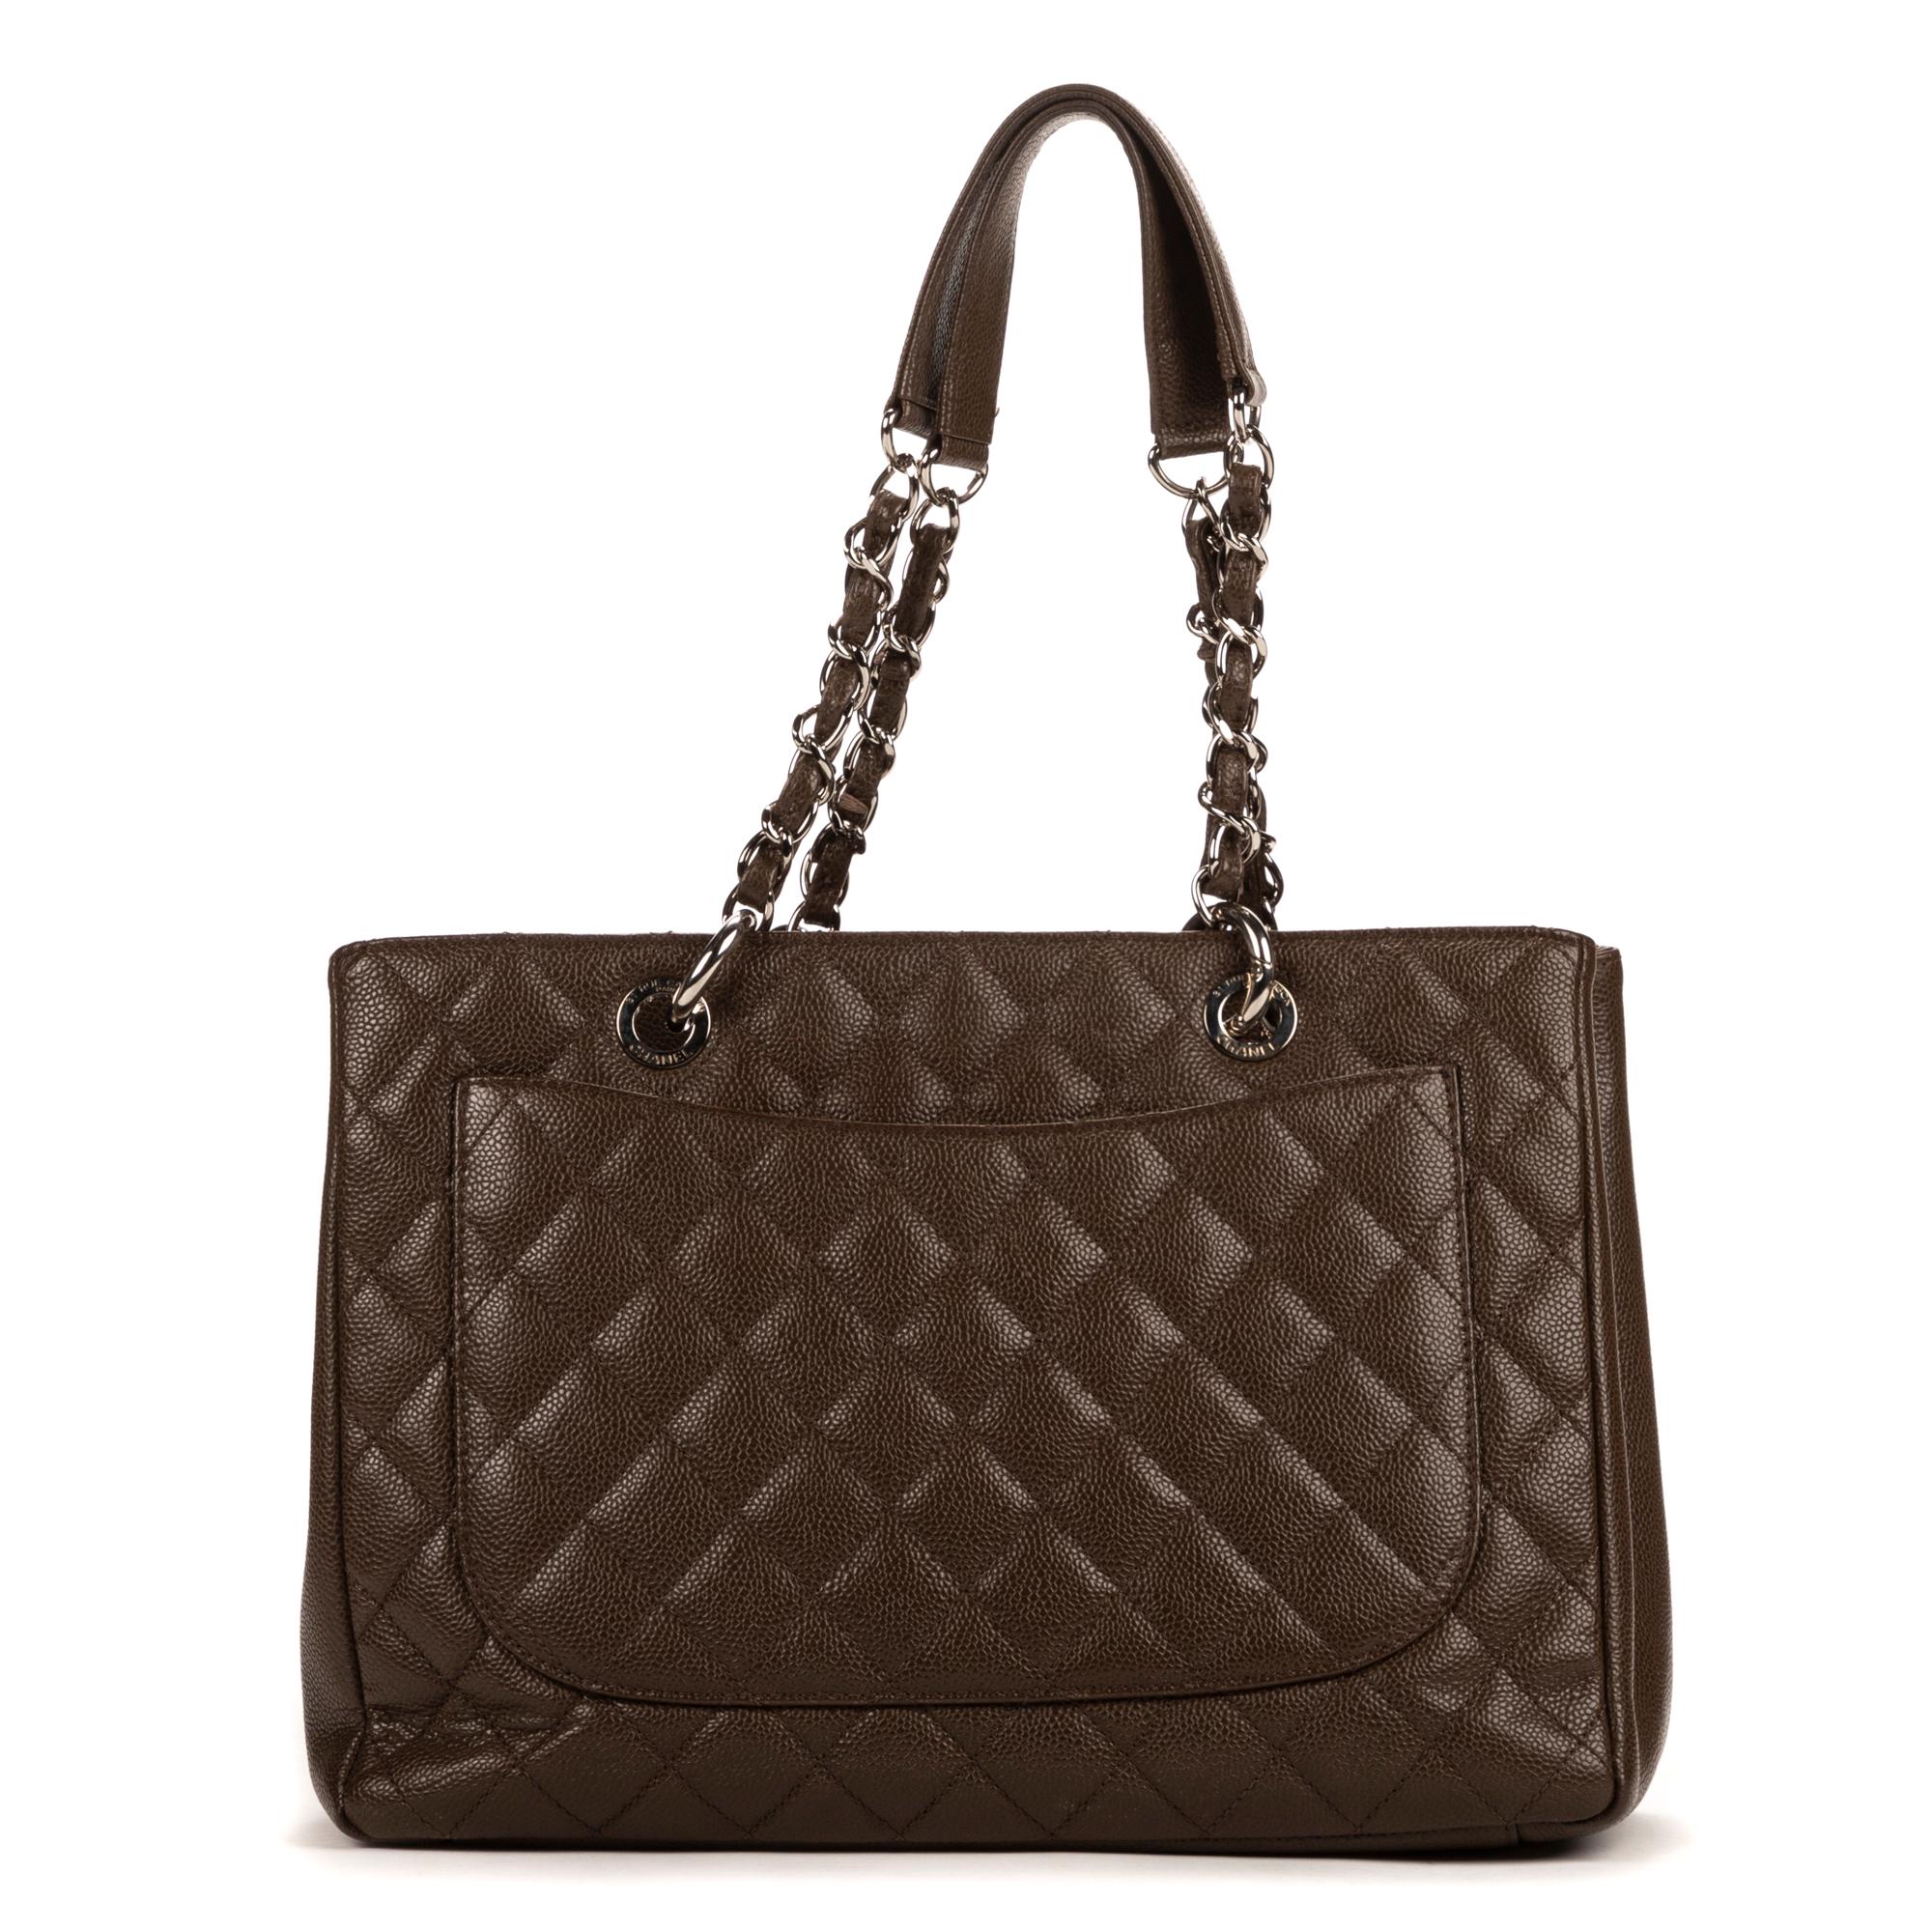 Chanel 2014 Brown CC Large Shopping Tote In Excellent Condition For Sale In Atlanta, GA